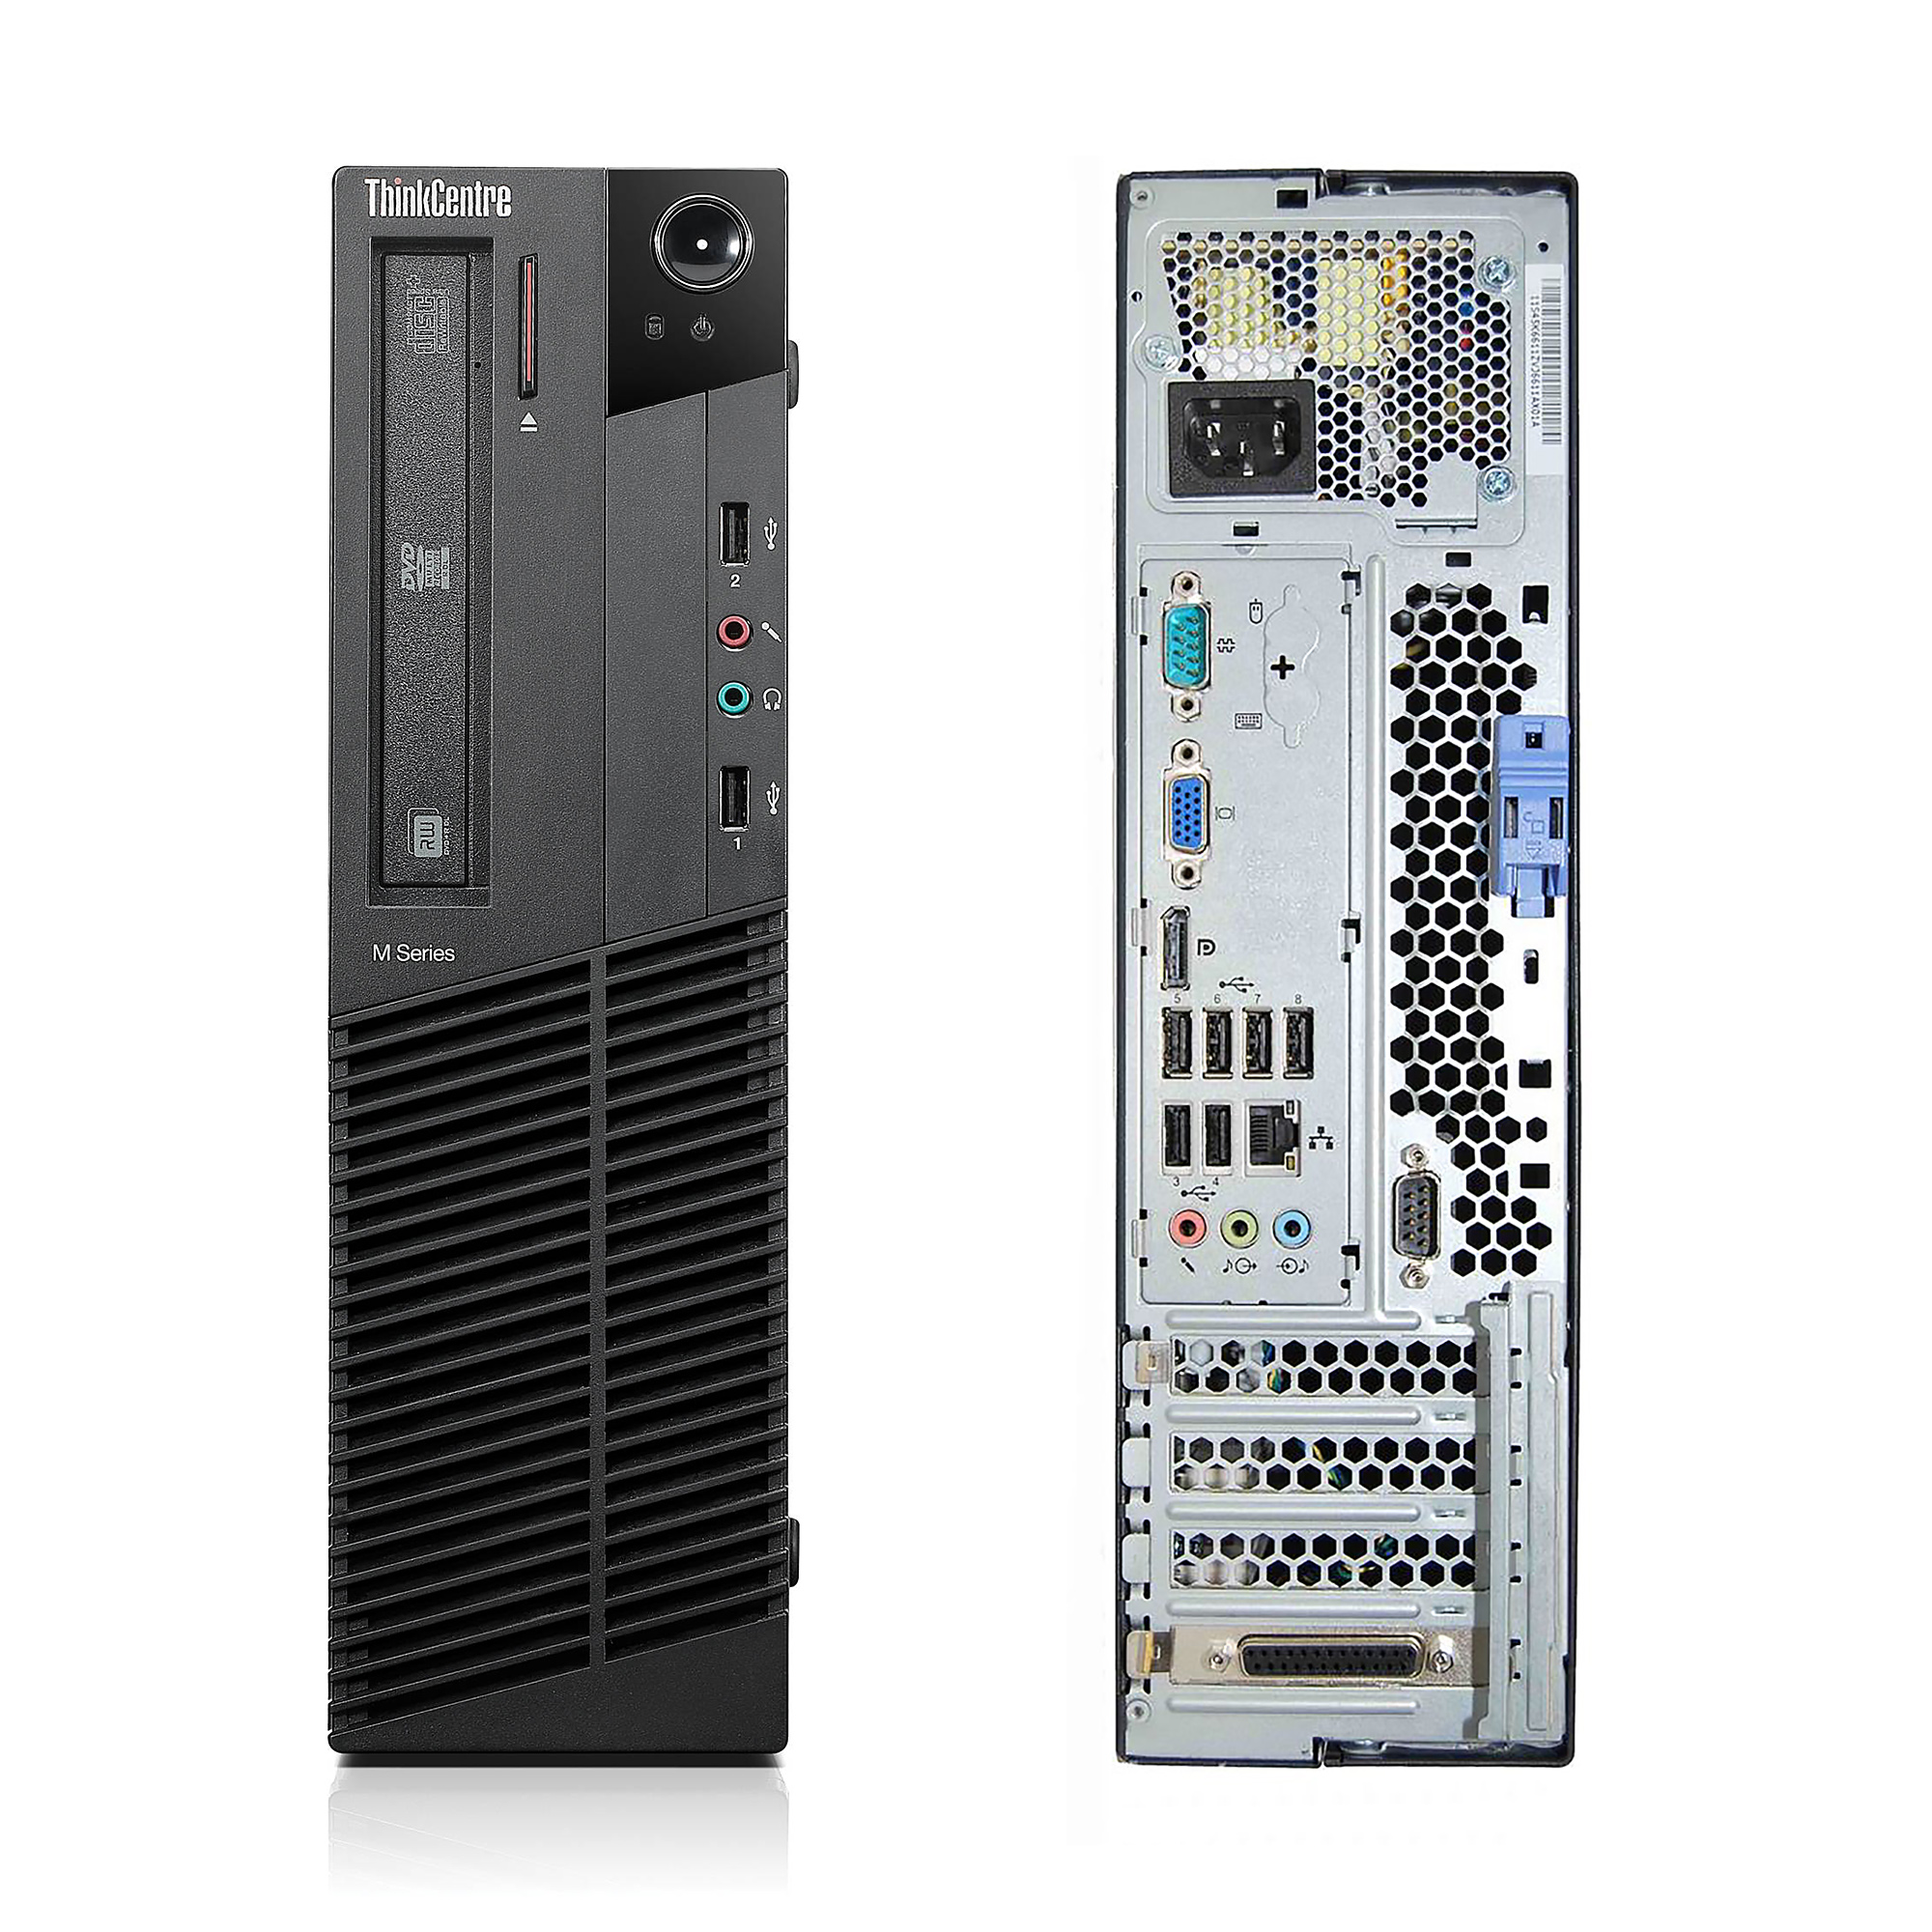 Used - Lenovo ThinkCentre M82, SFF, Intel Core i7-3770 @ 3.40 GHz, 8GB DDR3, NEW 240GB SSD, DVD-RW, Wi-Fi, VGA to HDMI Adapter, NEW Keyboard + Mouse, No OS - image 2 of 3